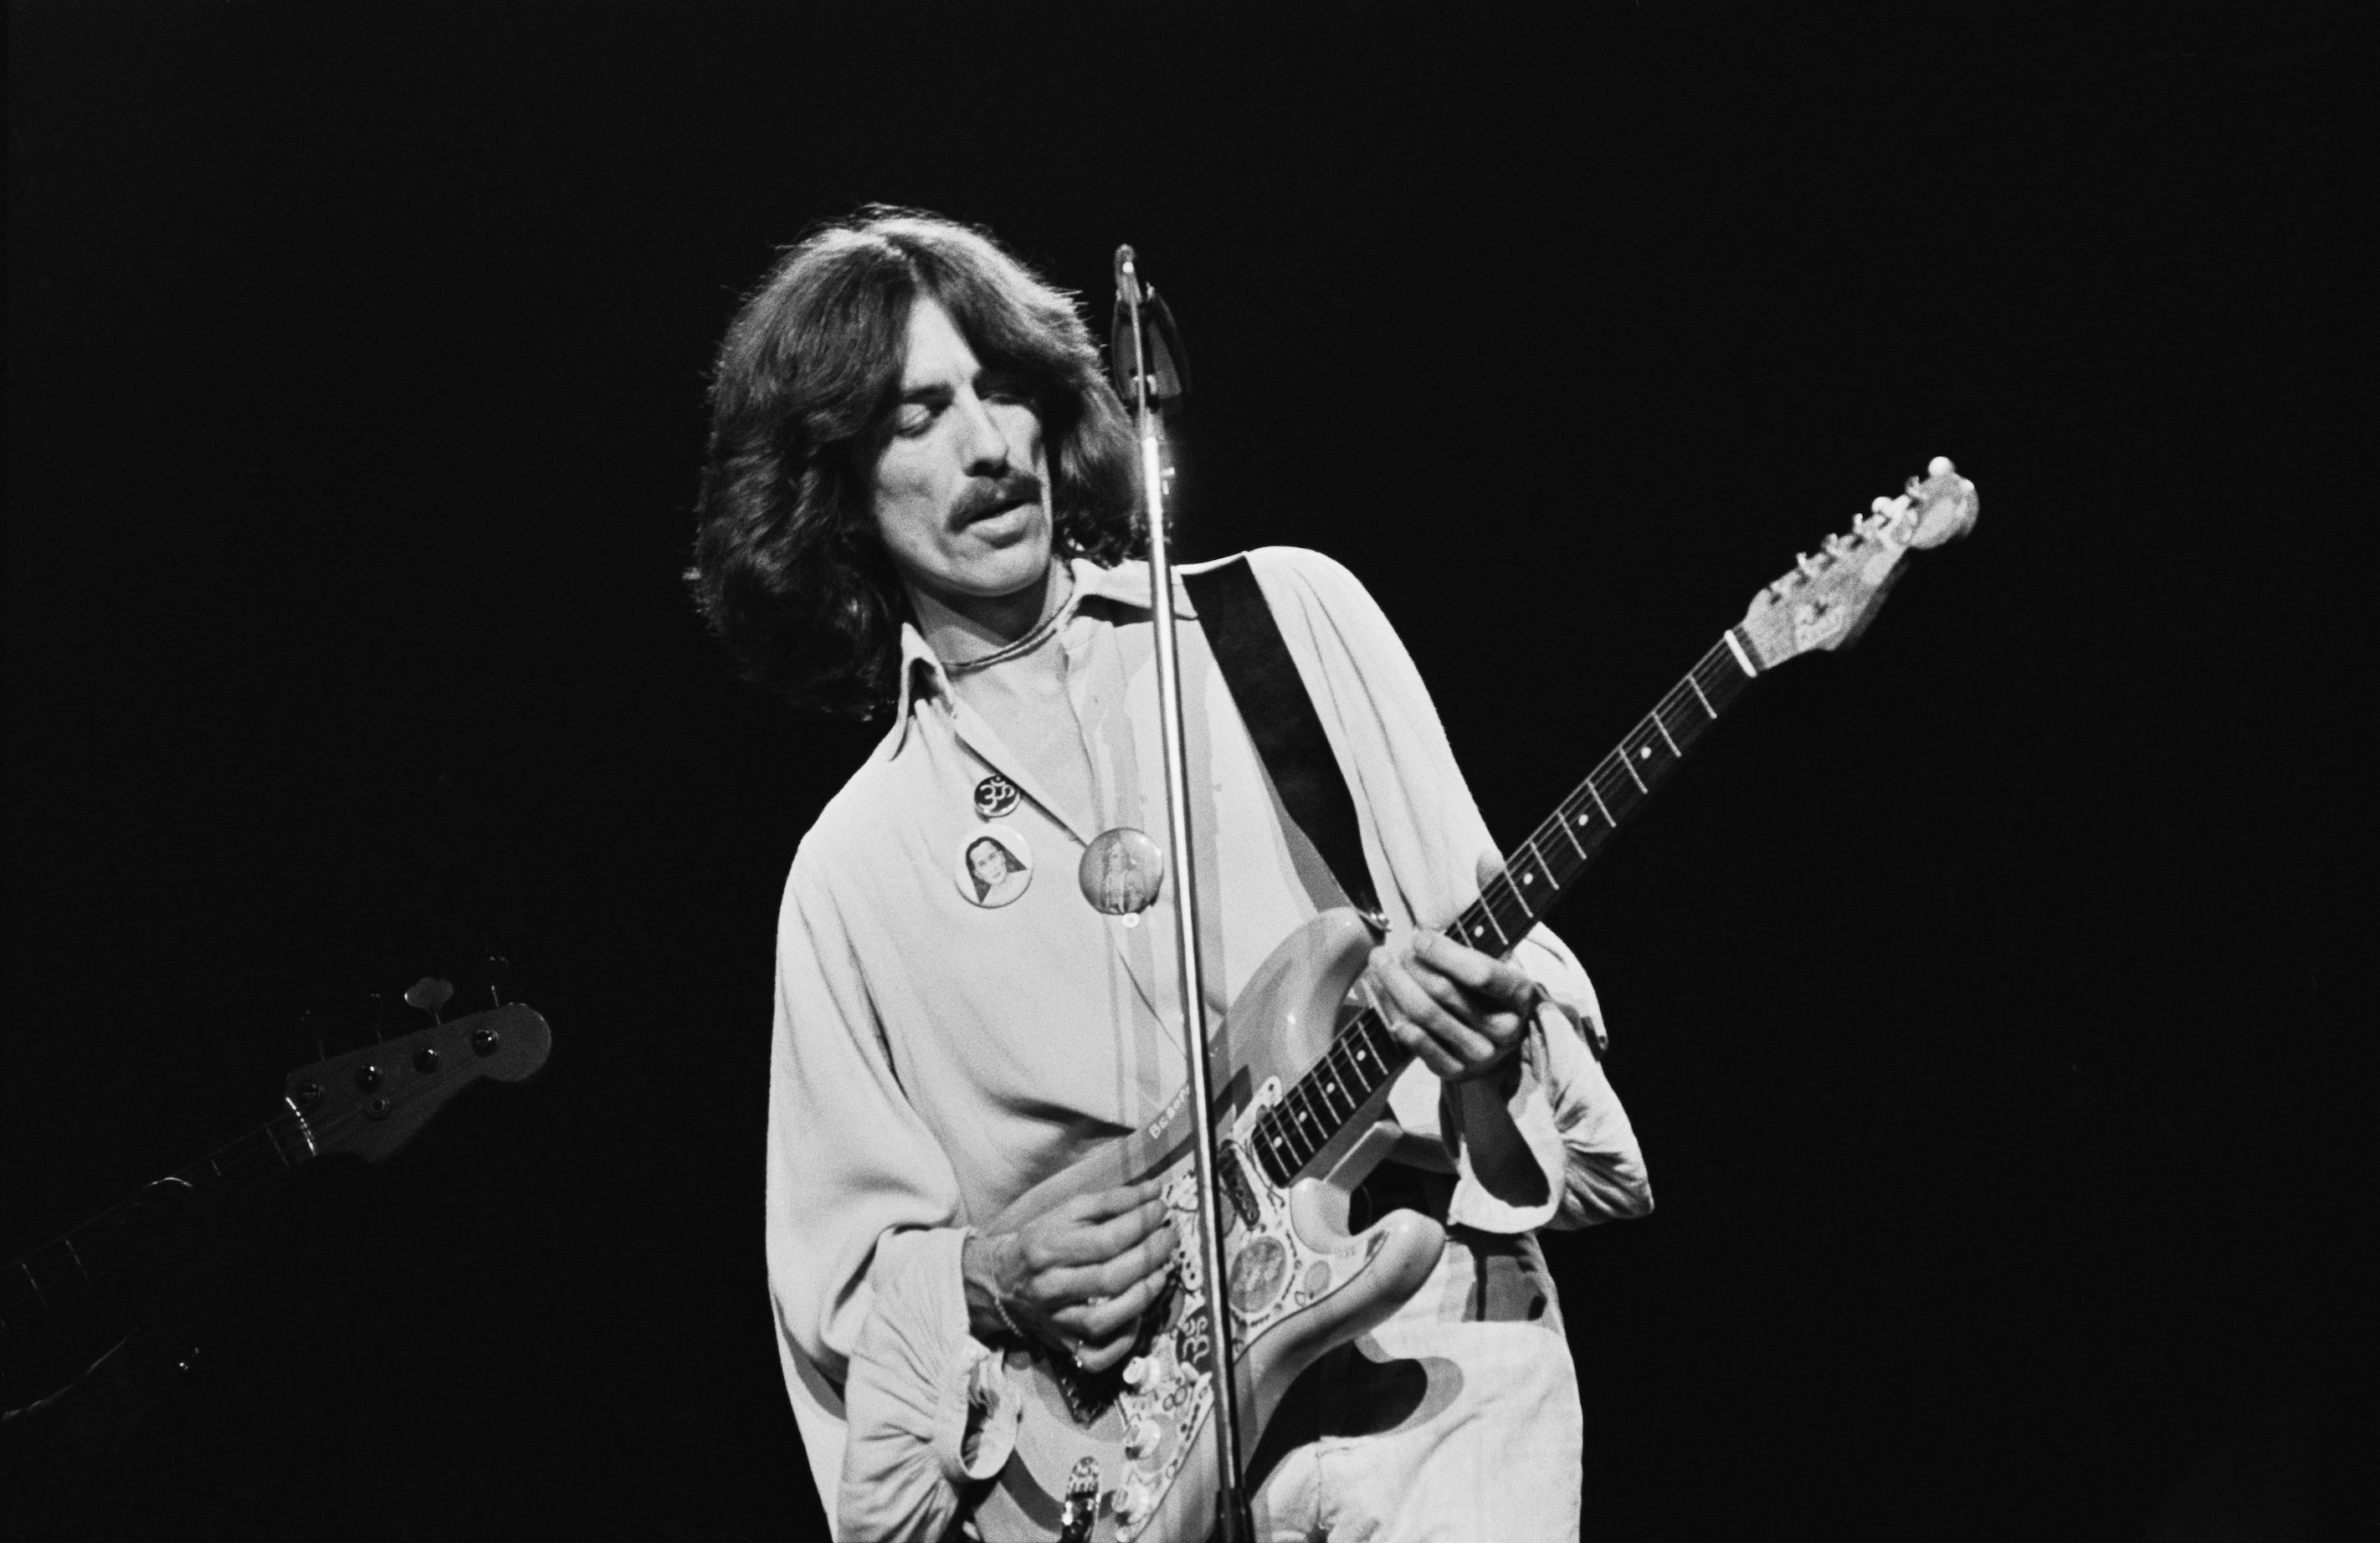 George Harrison performs in North America during his Dark Horse Tour in 1974